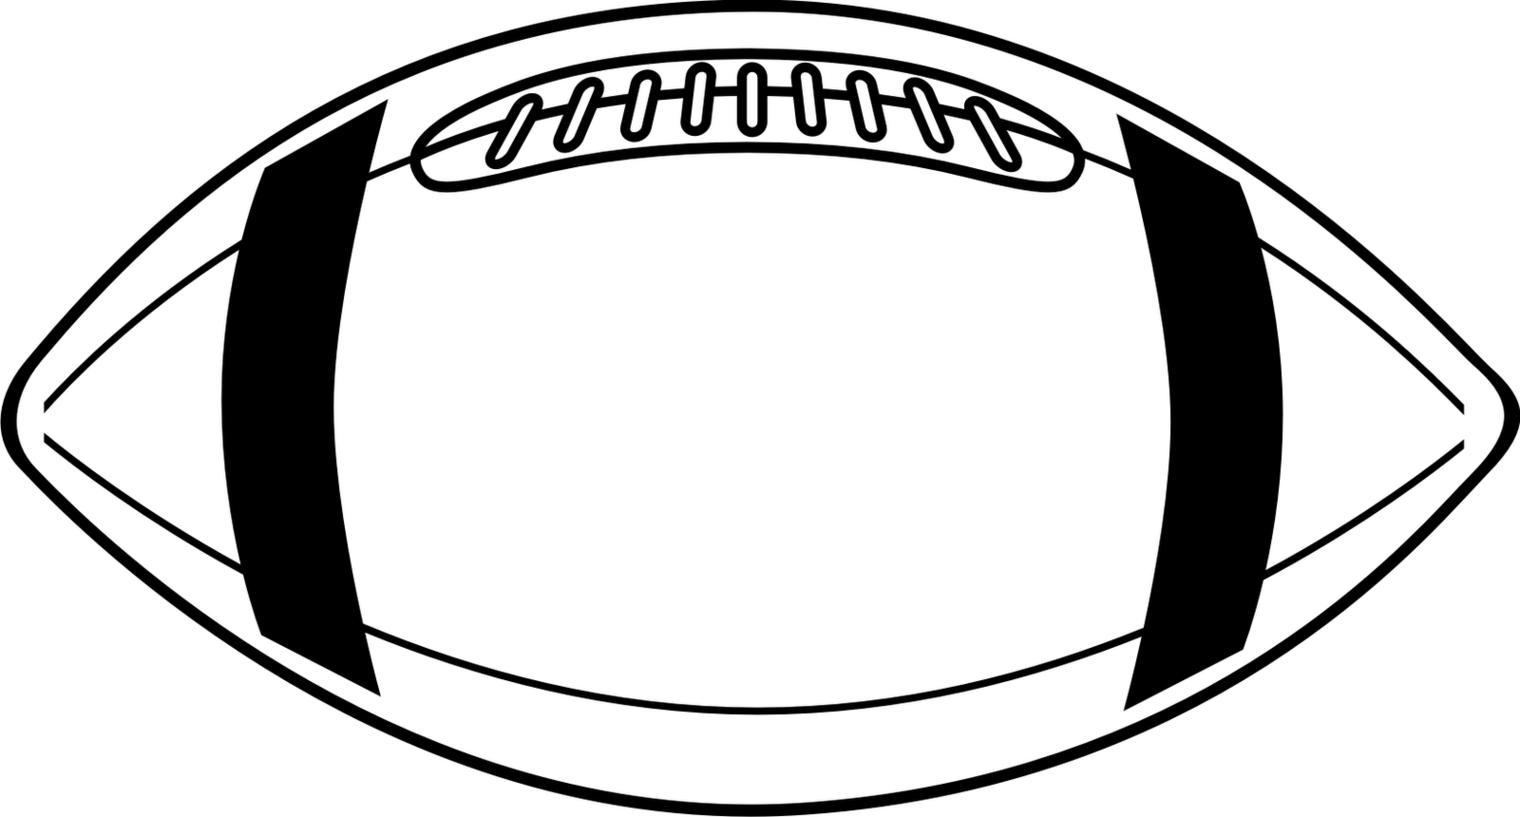 Wolverine Mascots Football Pictures Clipart 